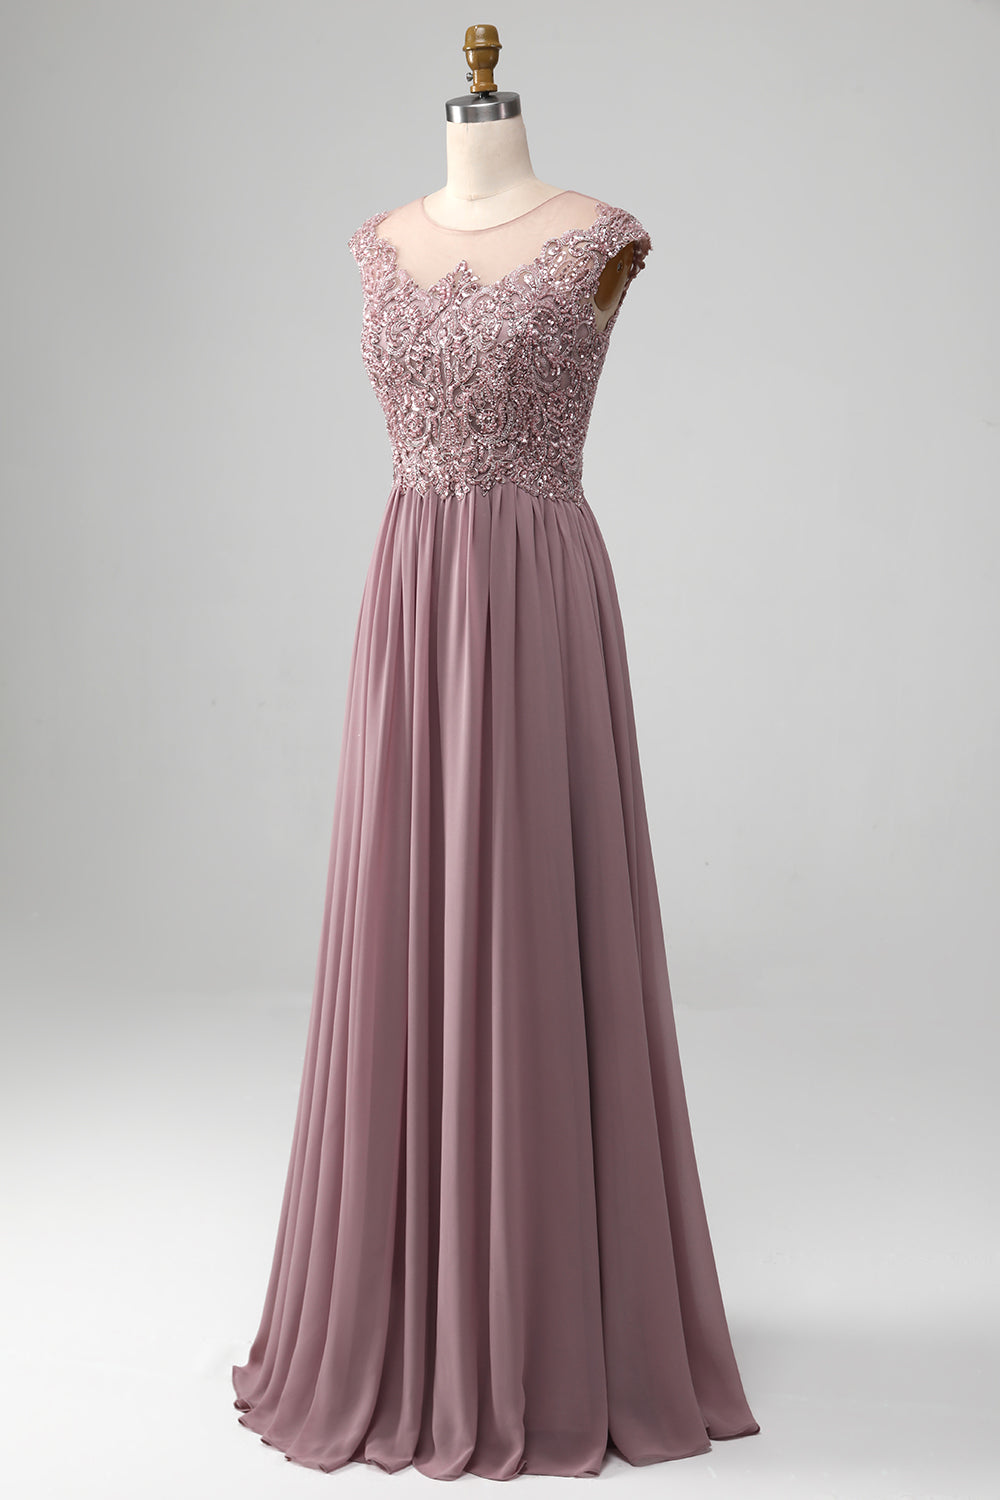 Dusk A-line Beaded Chiffon Round Neck Maxi Mother of the Bride Dress